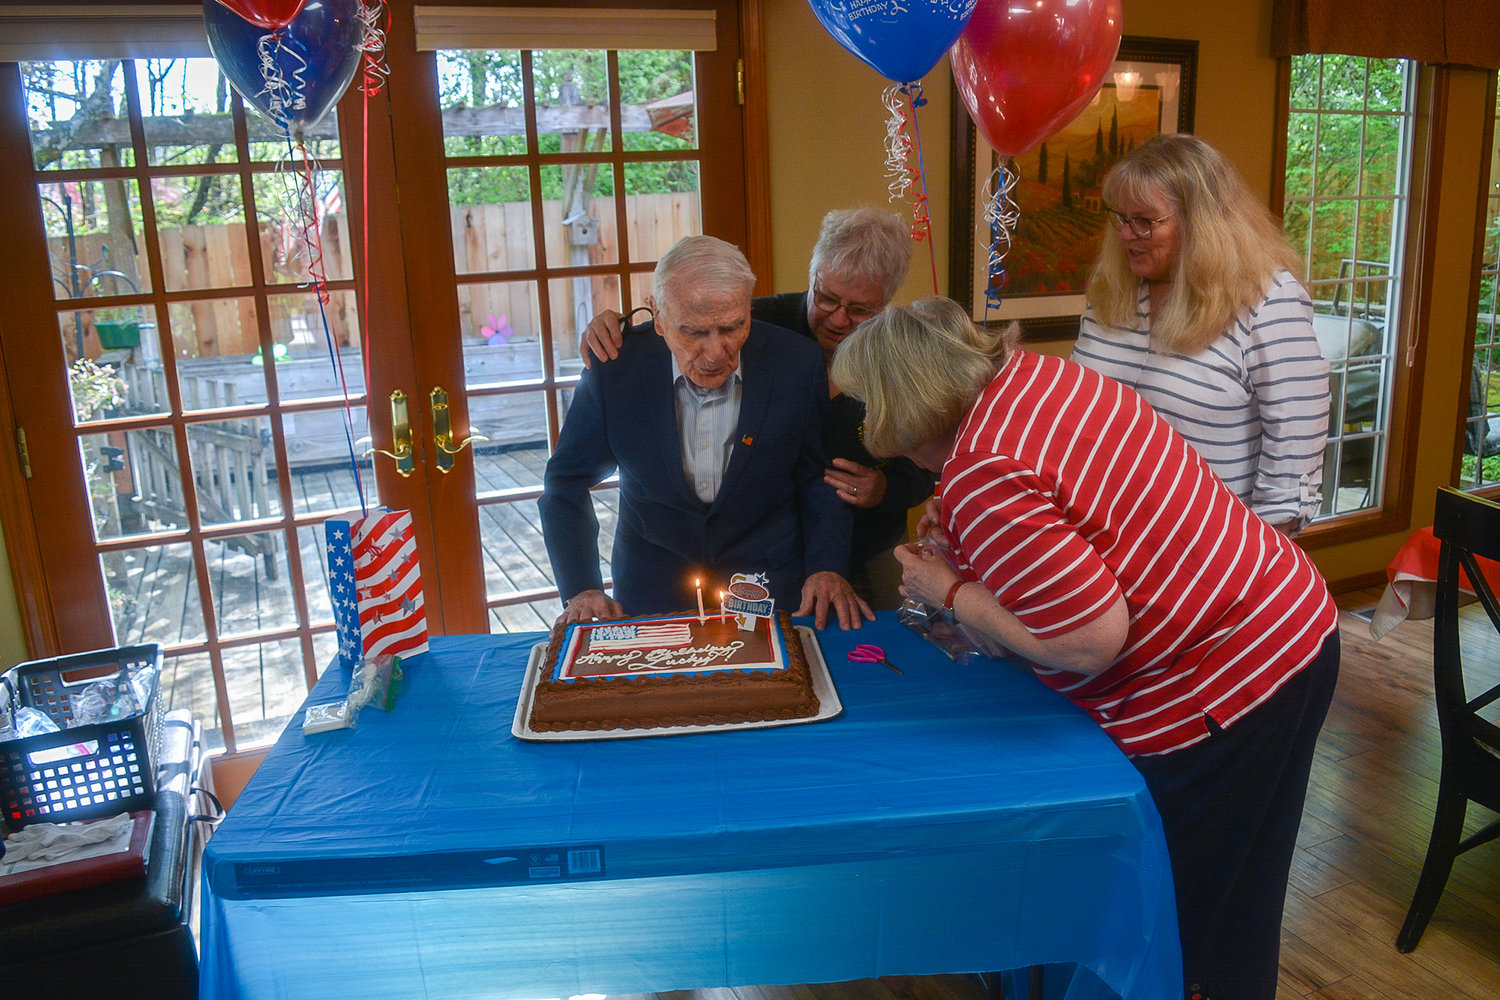 William “Lucky” Mullins blows out the candles on his birthday cake with support from his daughters Jaylene Mullins and Cindy Richert, and their friend Ginnie Bush during his birthday party in Vancouver on May 4.